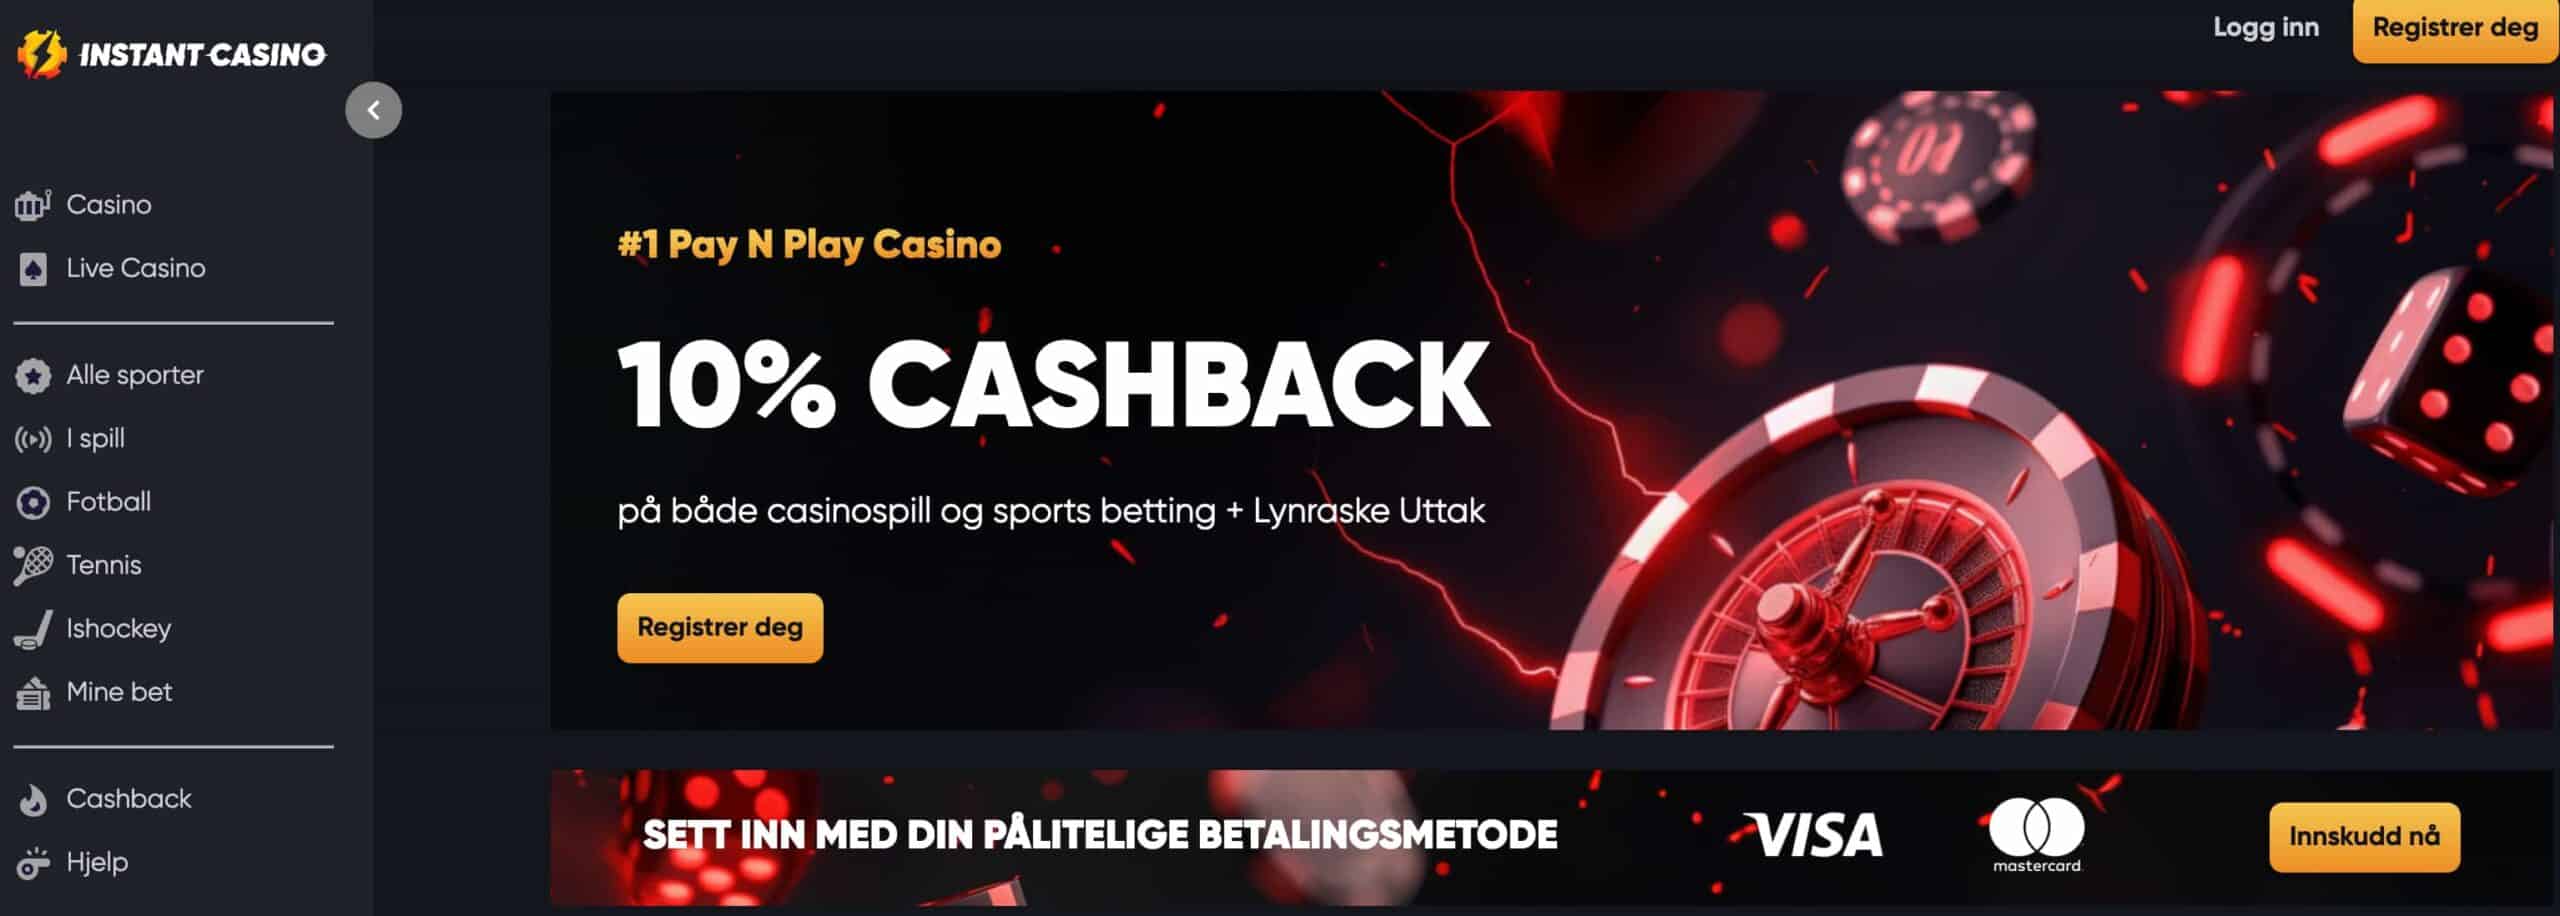 Instant Casino landing page 2024